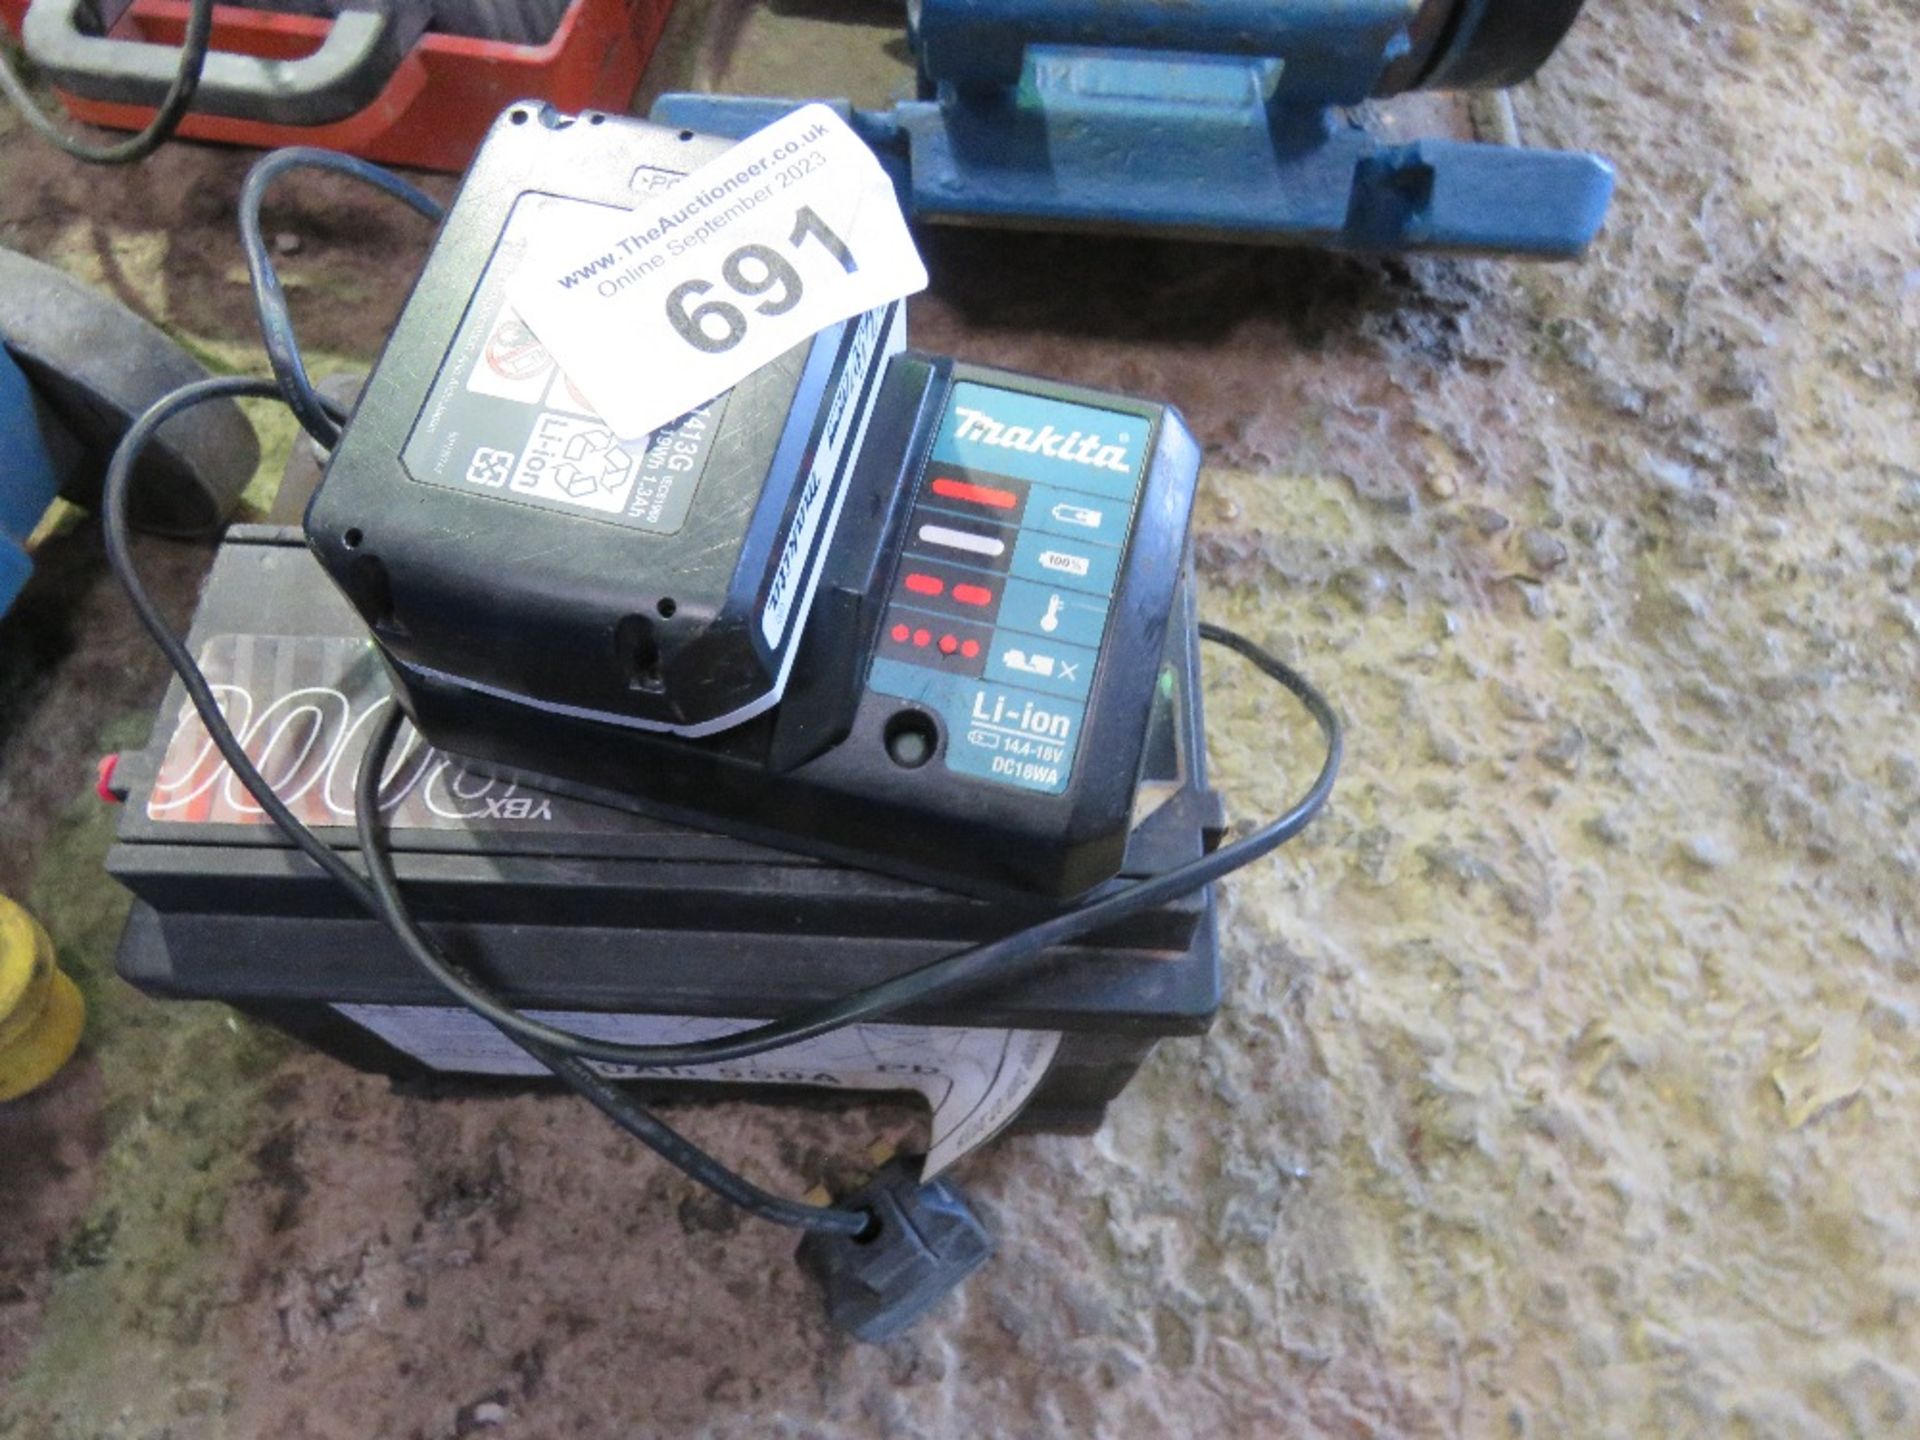 CAR BATTERY WITH A MAKITA BATTERY PLUS CHARGER. - Image 2 of 2